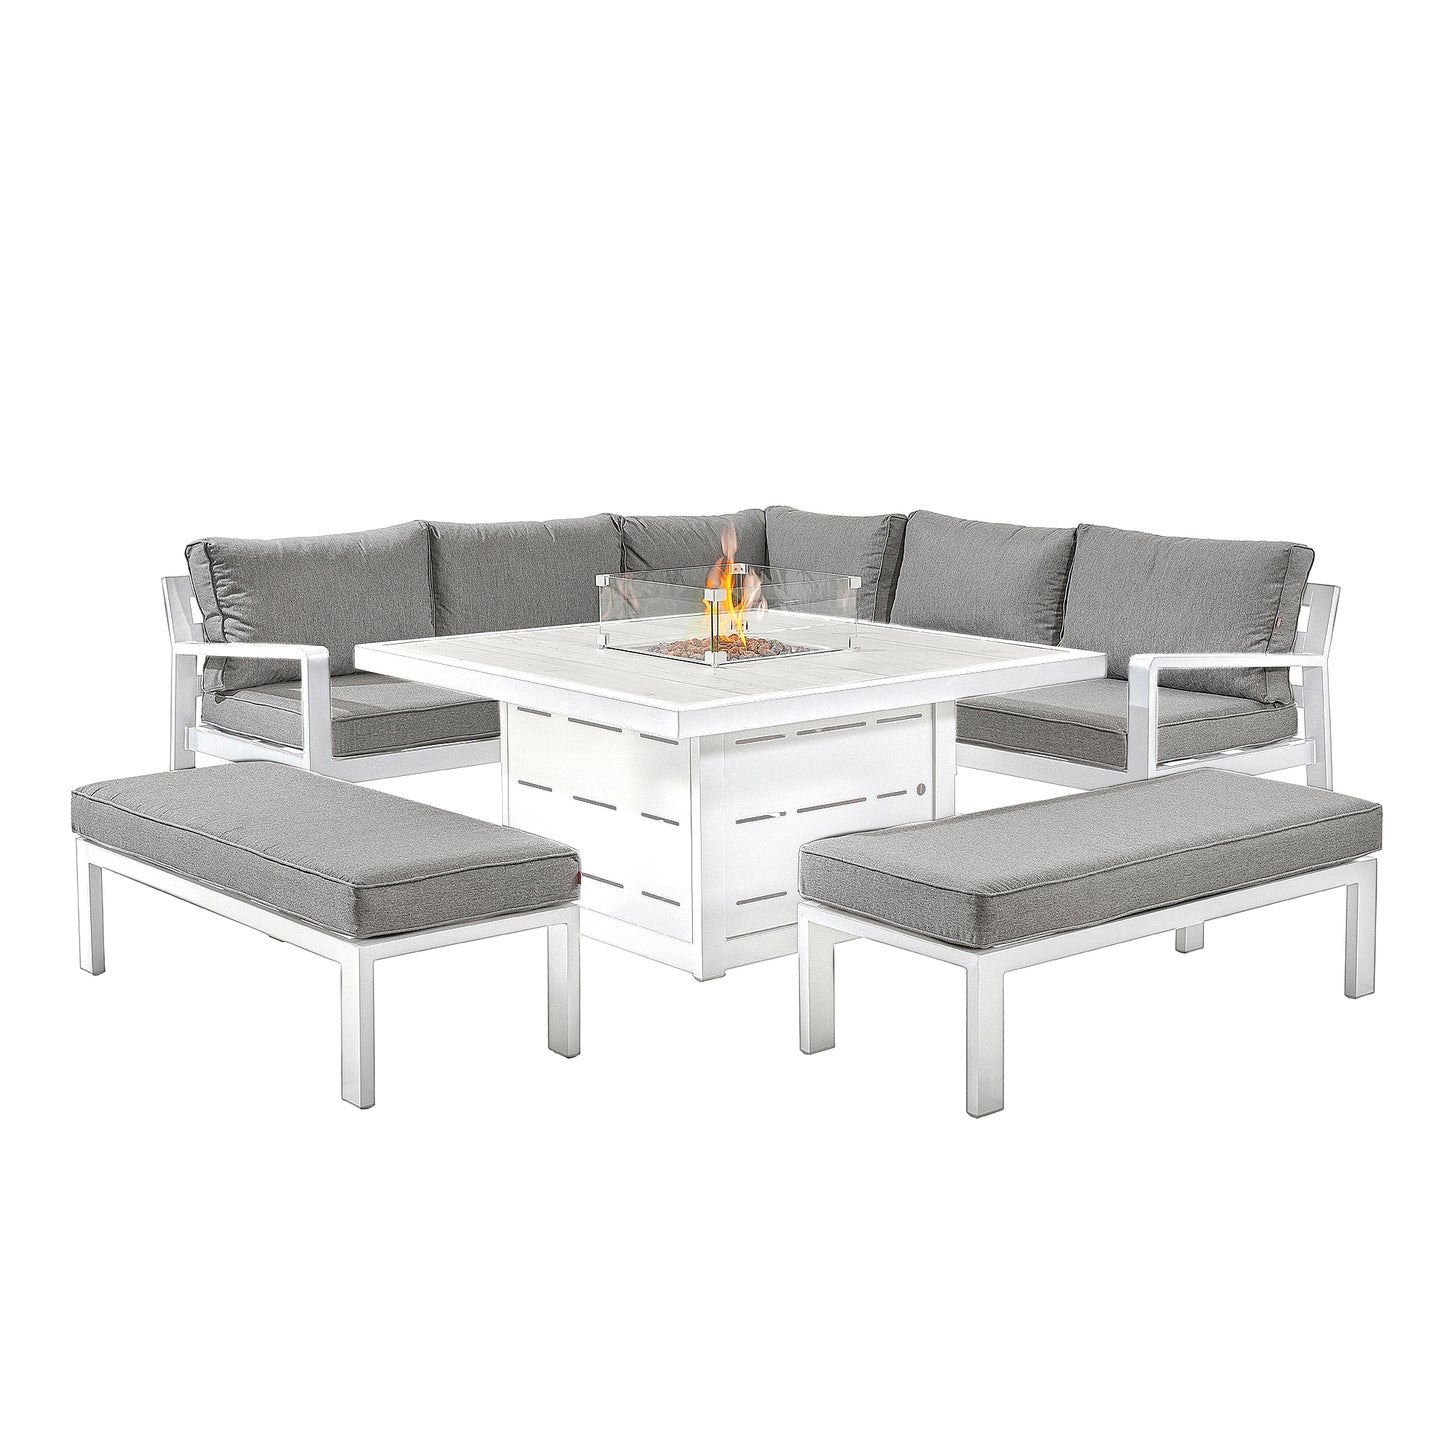 The Tutbury Fire Pit Table Garden Set creates an inviting outdoor living space. This patio set includes a propane fire pit table, corner sofa, and two benches to comfortably seat up to 5 people around flickering flames. Durable steel construction built to withstand weather and heavy use for years.